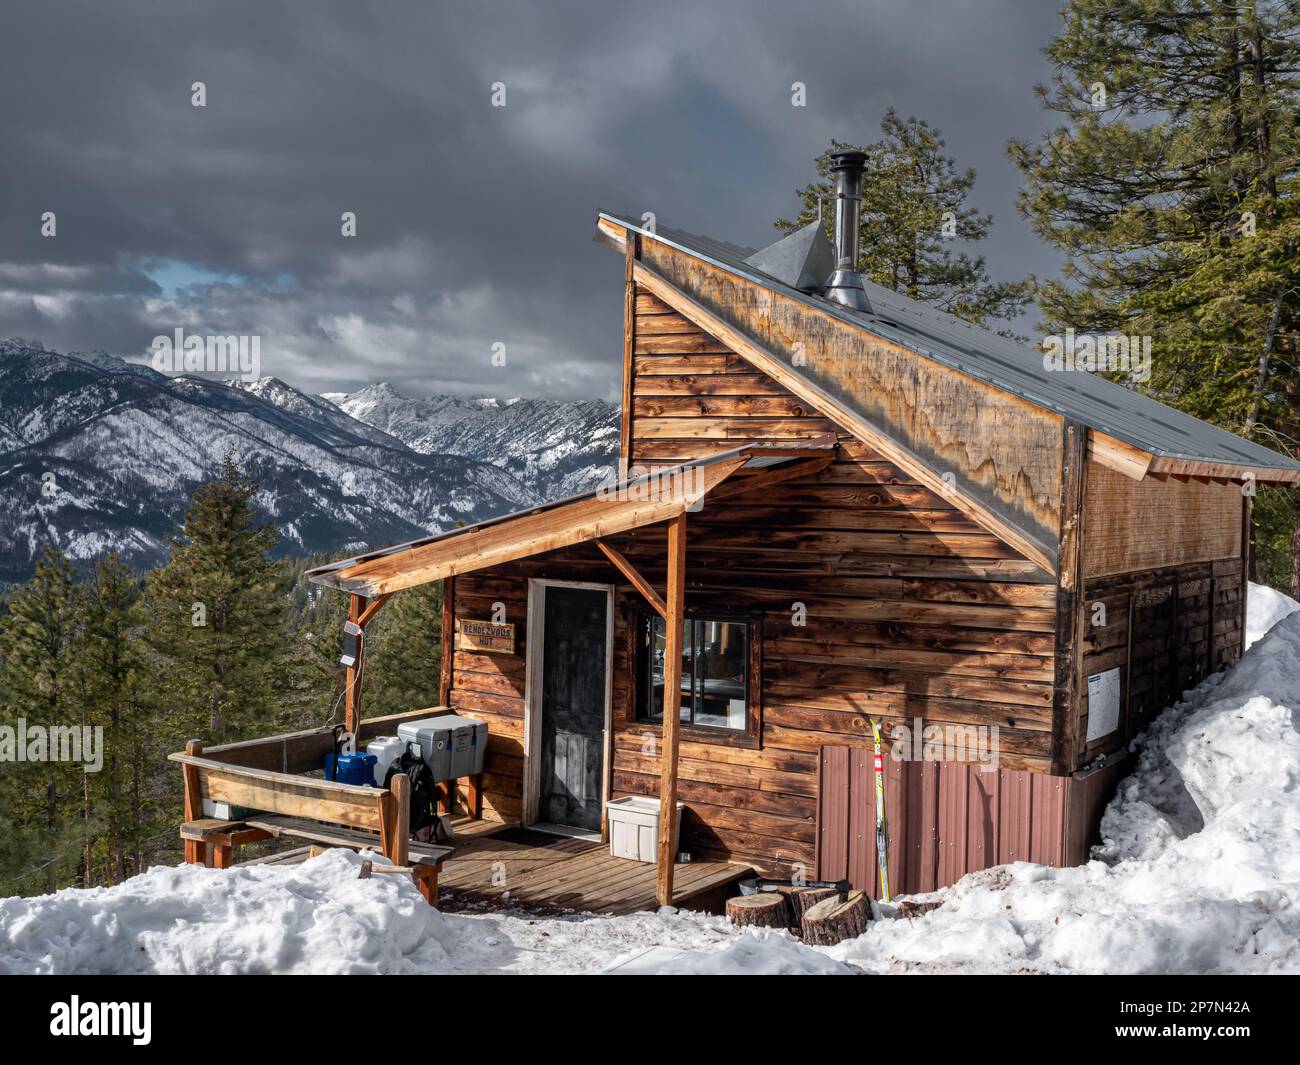 WA23238-00...WASHINGTON - Rendezvous Hut, overlooking the Methow Valley and North Cascades Mountains. Stock Photo